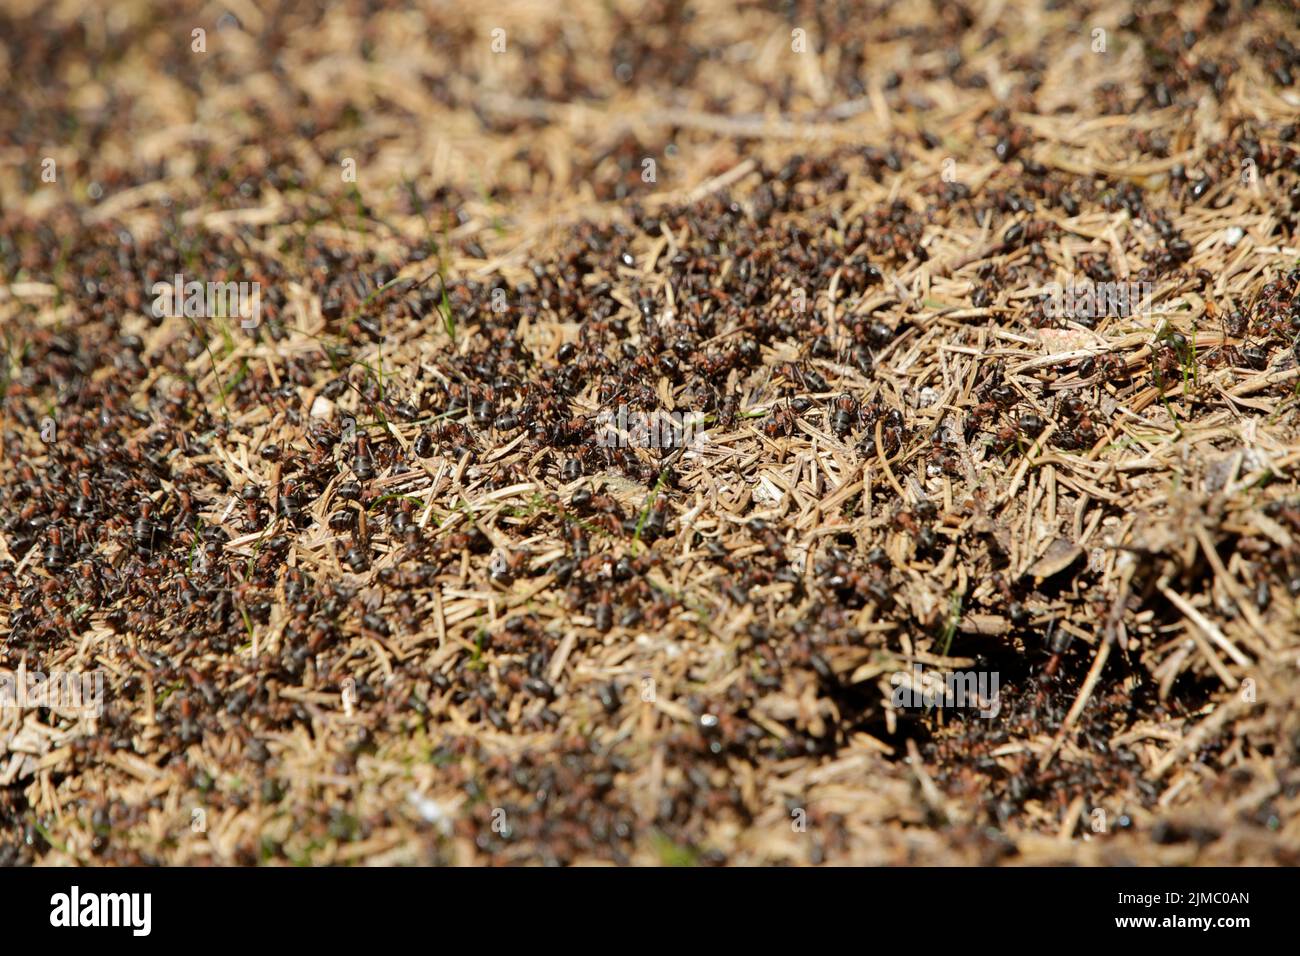 Nest of Red ants in spring (Formica rufa) Stock Photo